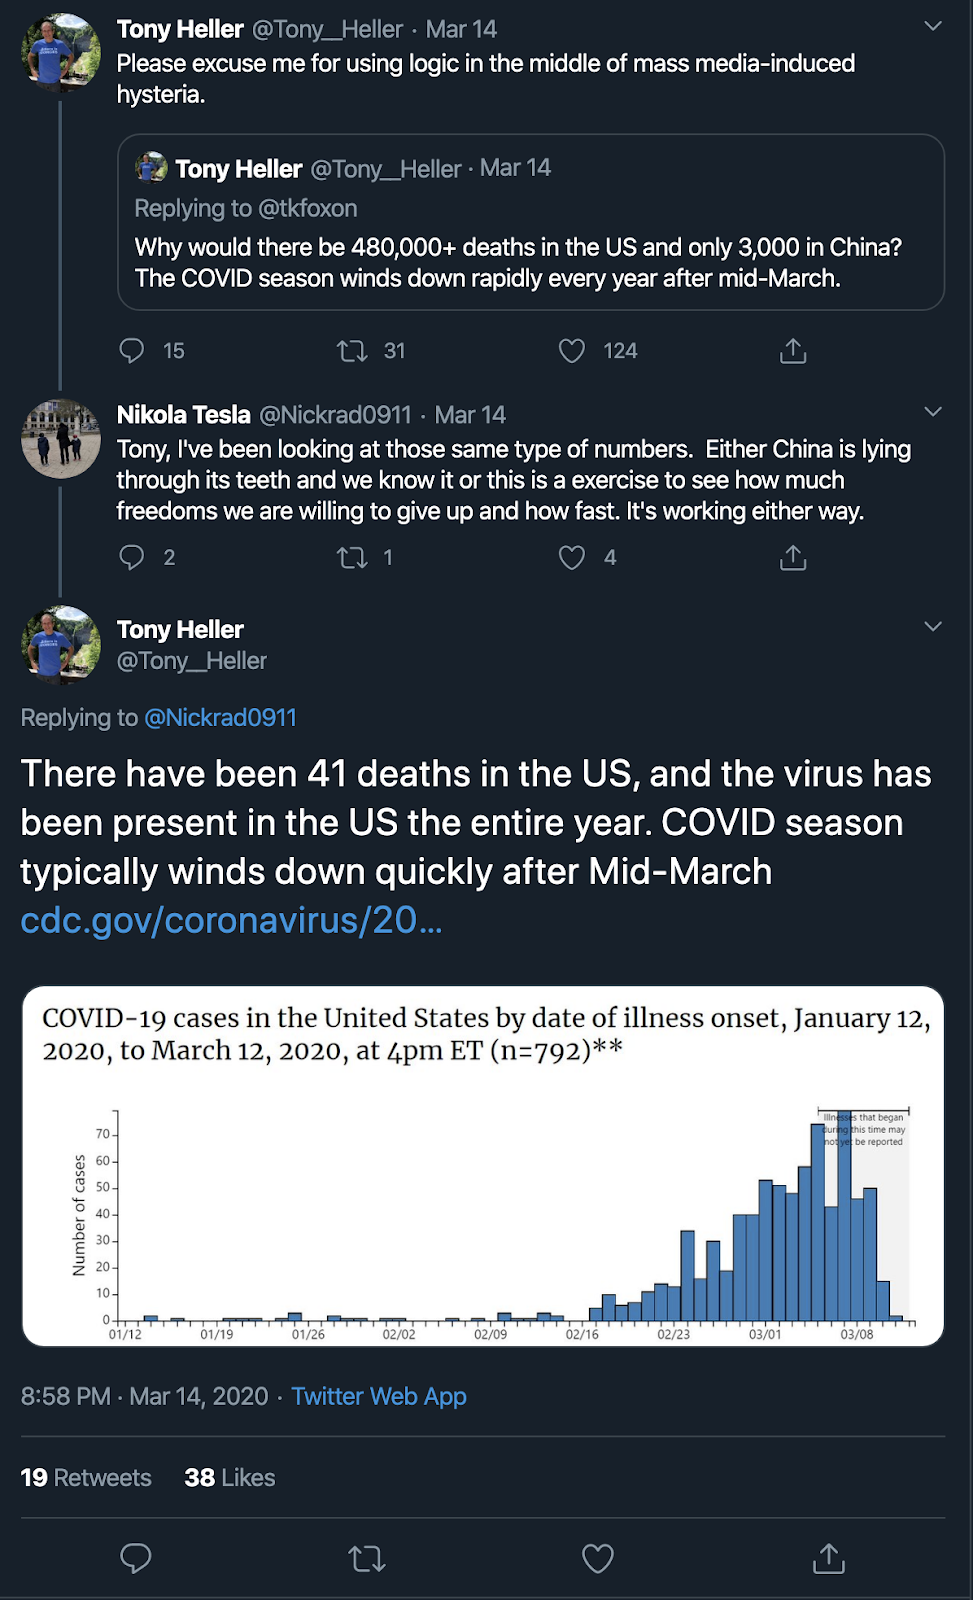 There have been 41 deaths in the US, and the virus has been present in the US the entire year. COVID season typically winds down quickly after Mid-March